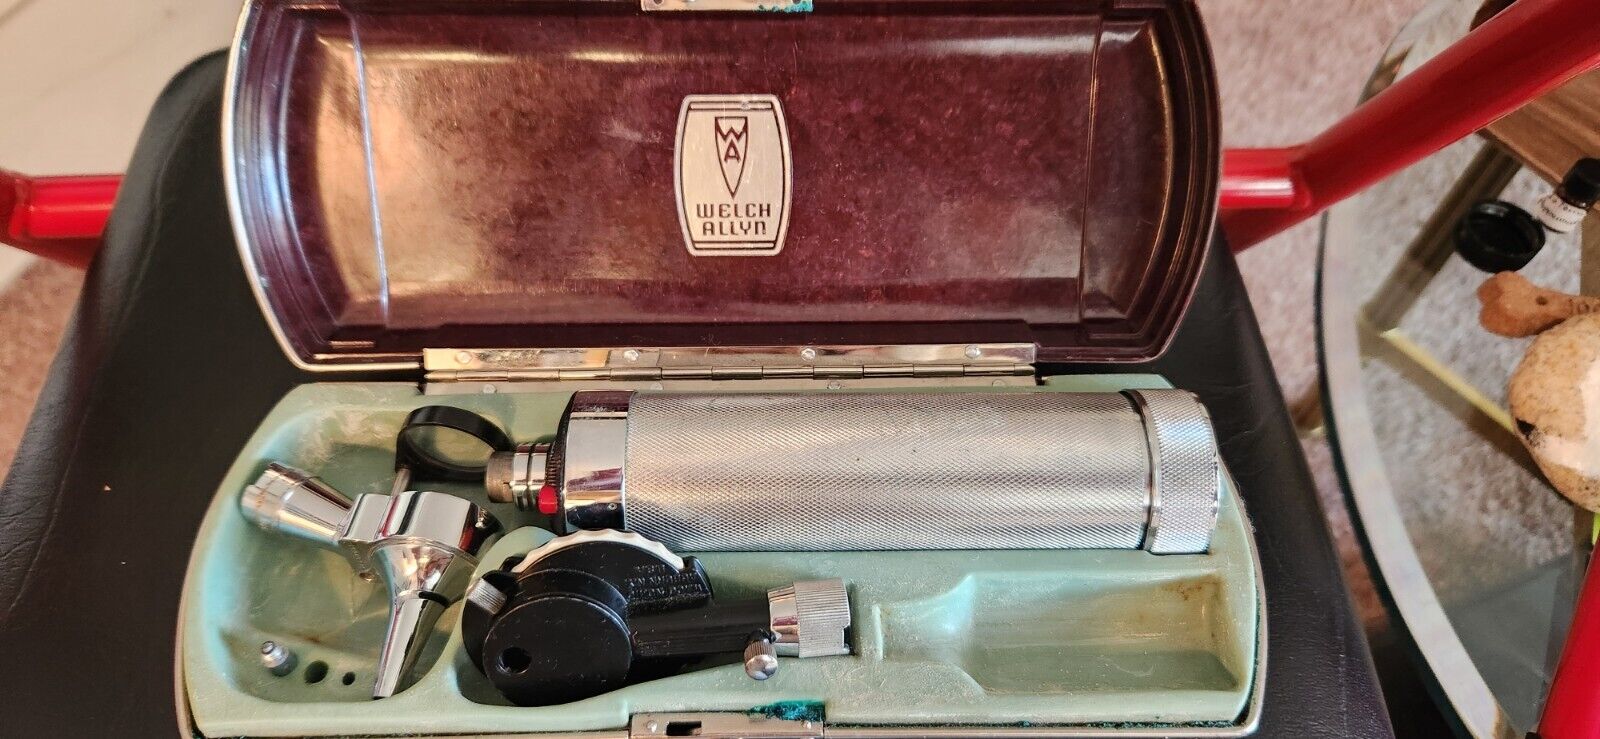 Welch Allyn Vintage Oto-Opthalmoscope From 1980's